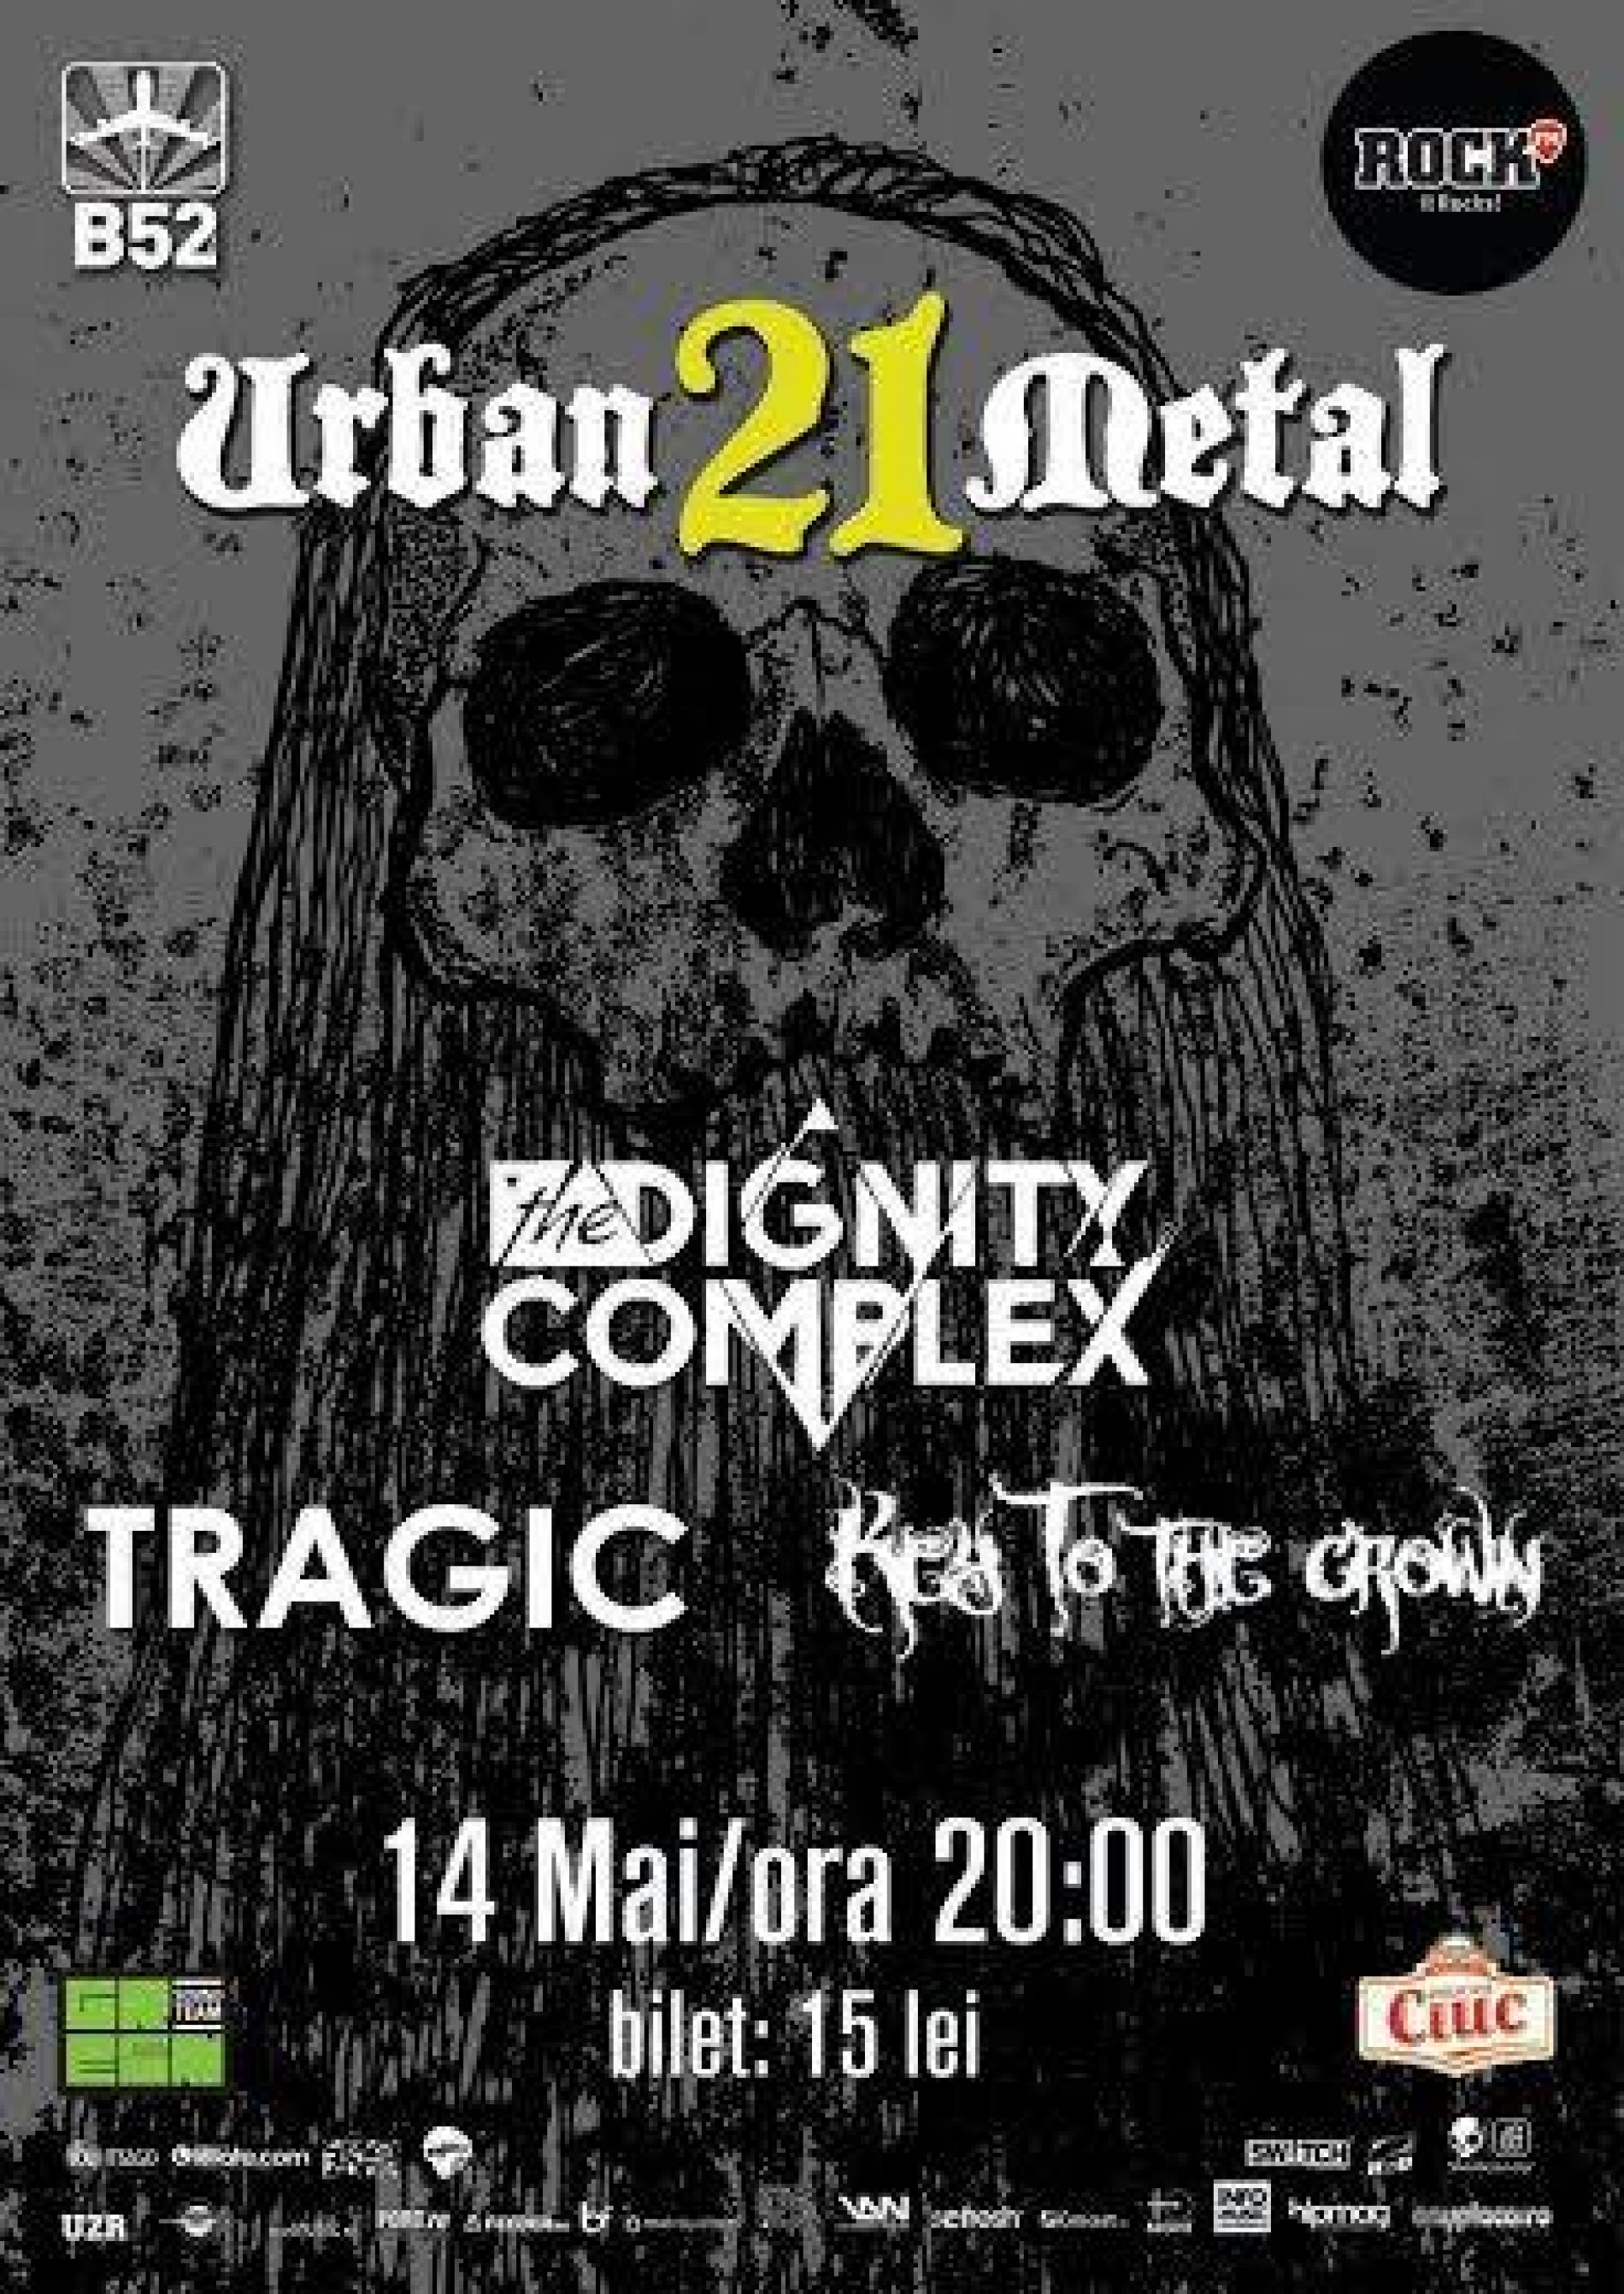 Urban Metal 21: Concert The Dignity Complex, Key To The Crown, Tragic